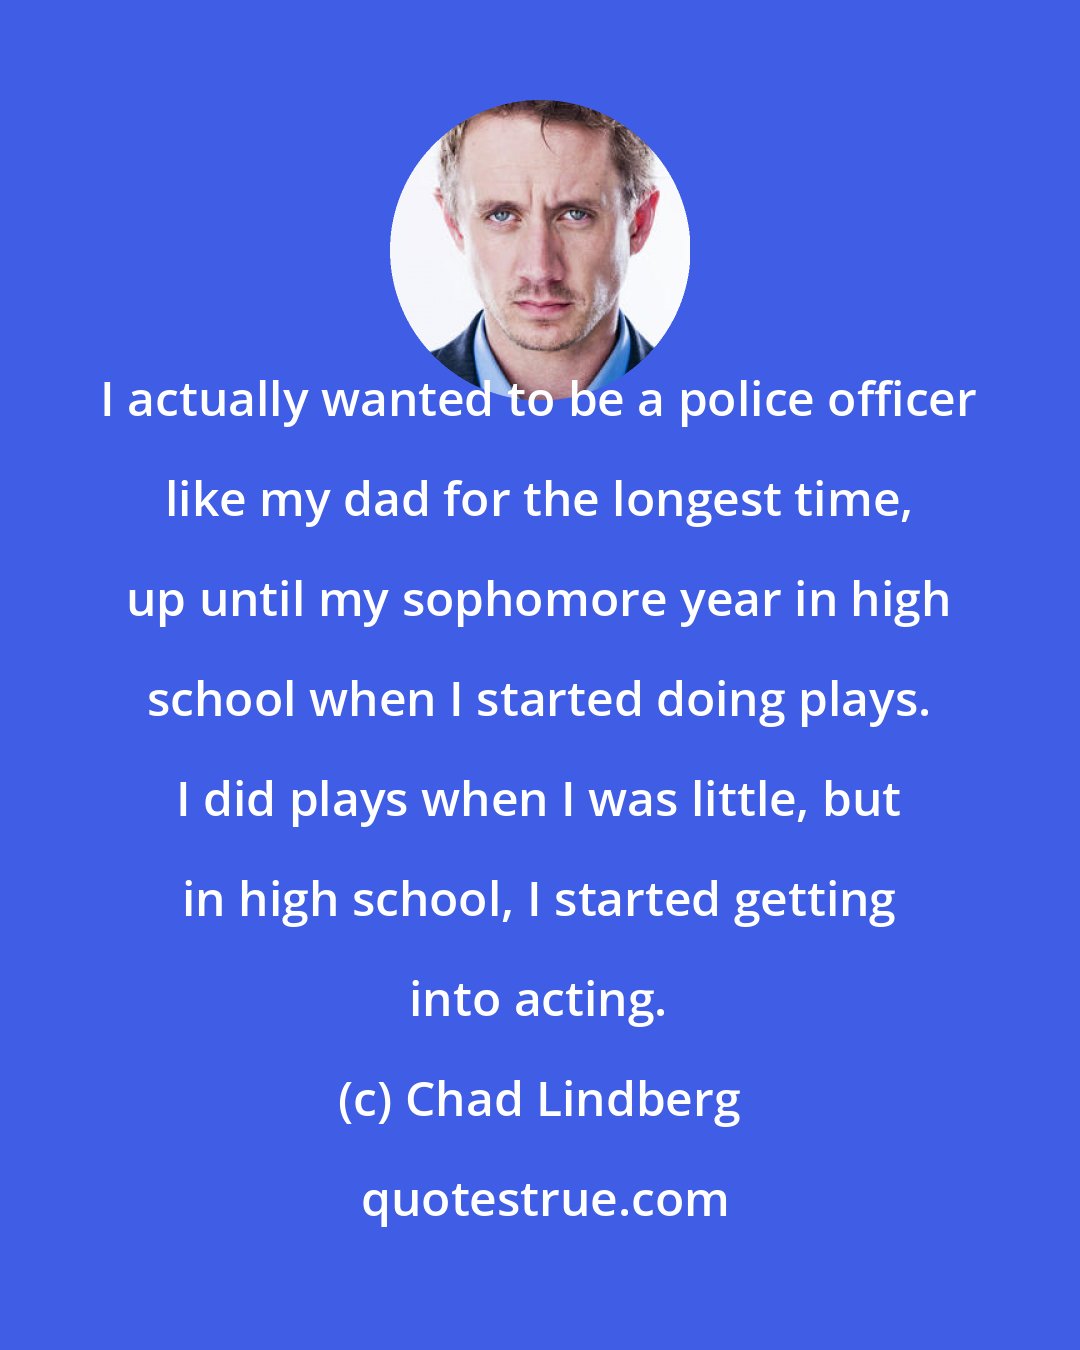 Chad Lindberg: I actually wanted to be a police officer like my dad for the longest time, up until my sophomore year in high school when I started doing plays. I did plays when I was little, but in high school, I started getting into acting.